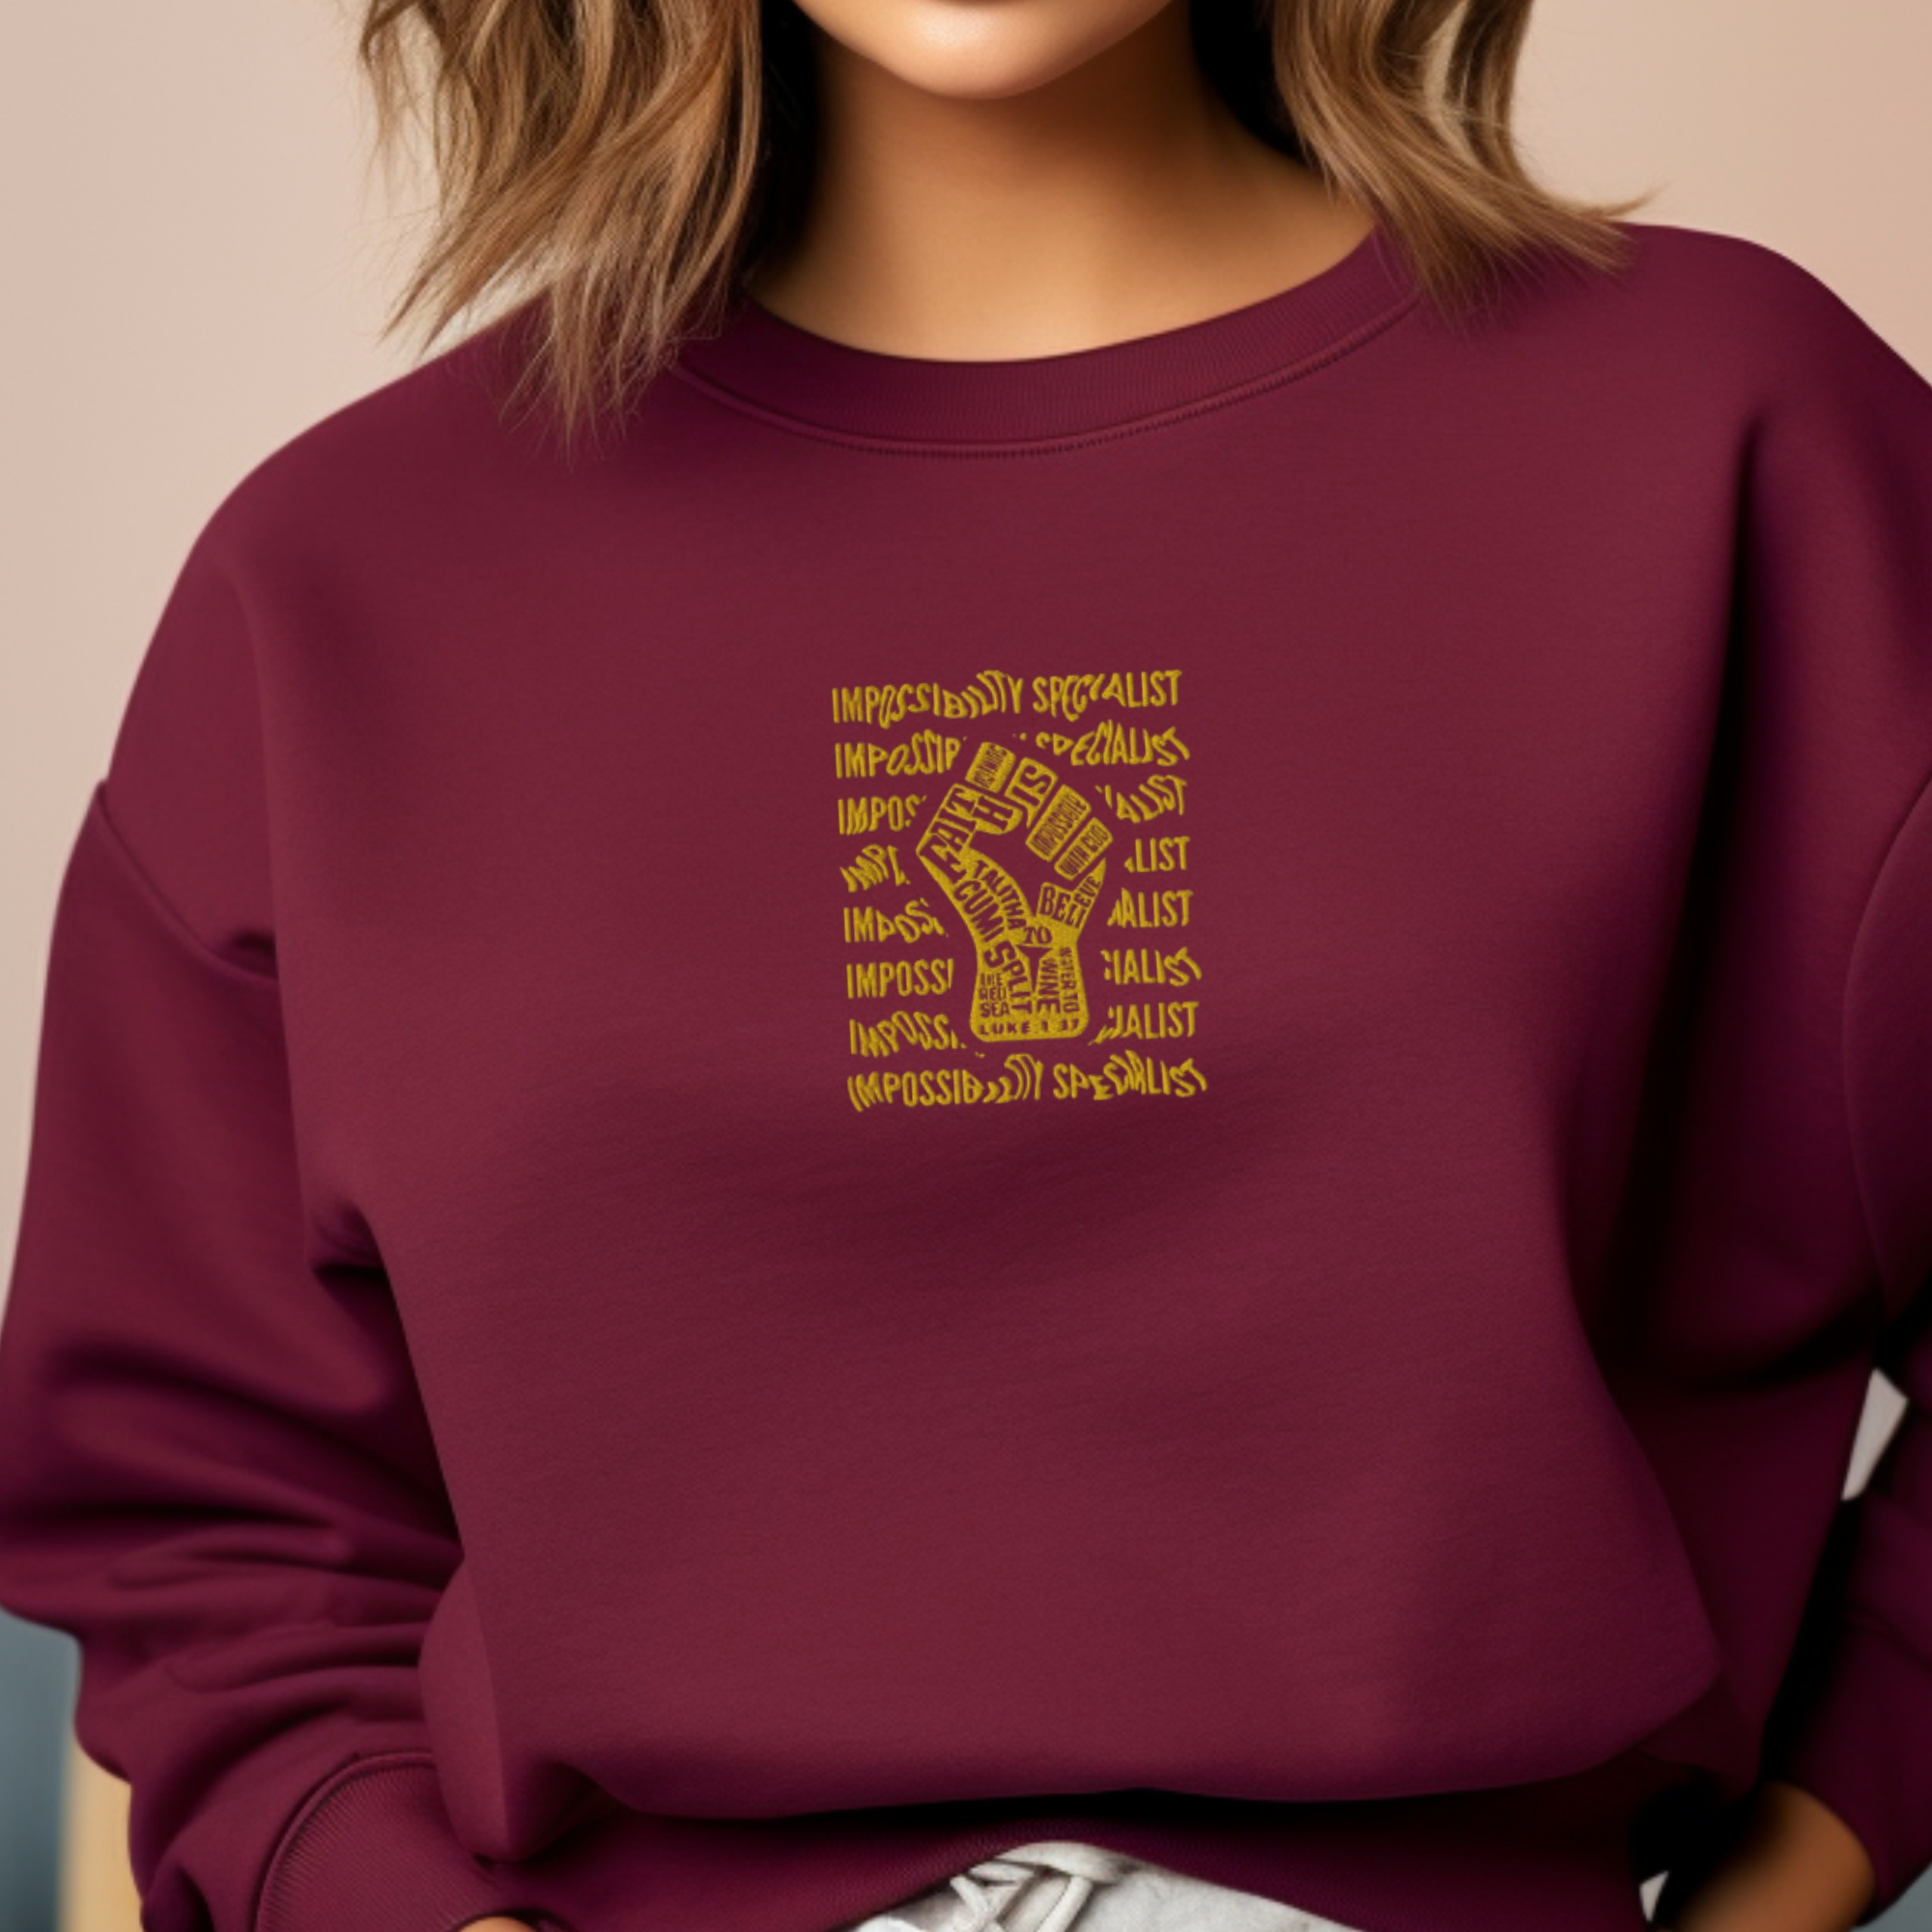 Impossibility Specialist Embroidered Sweatshirt